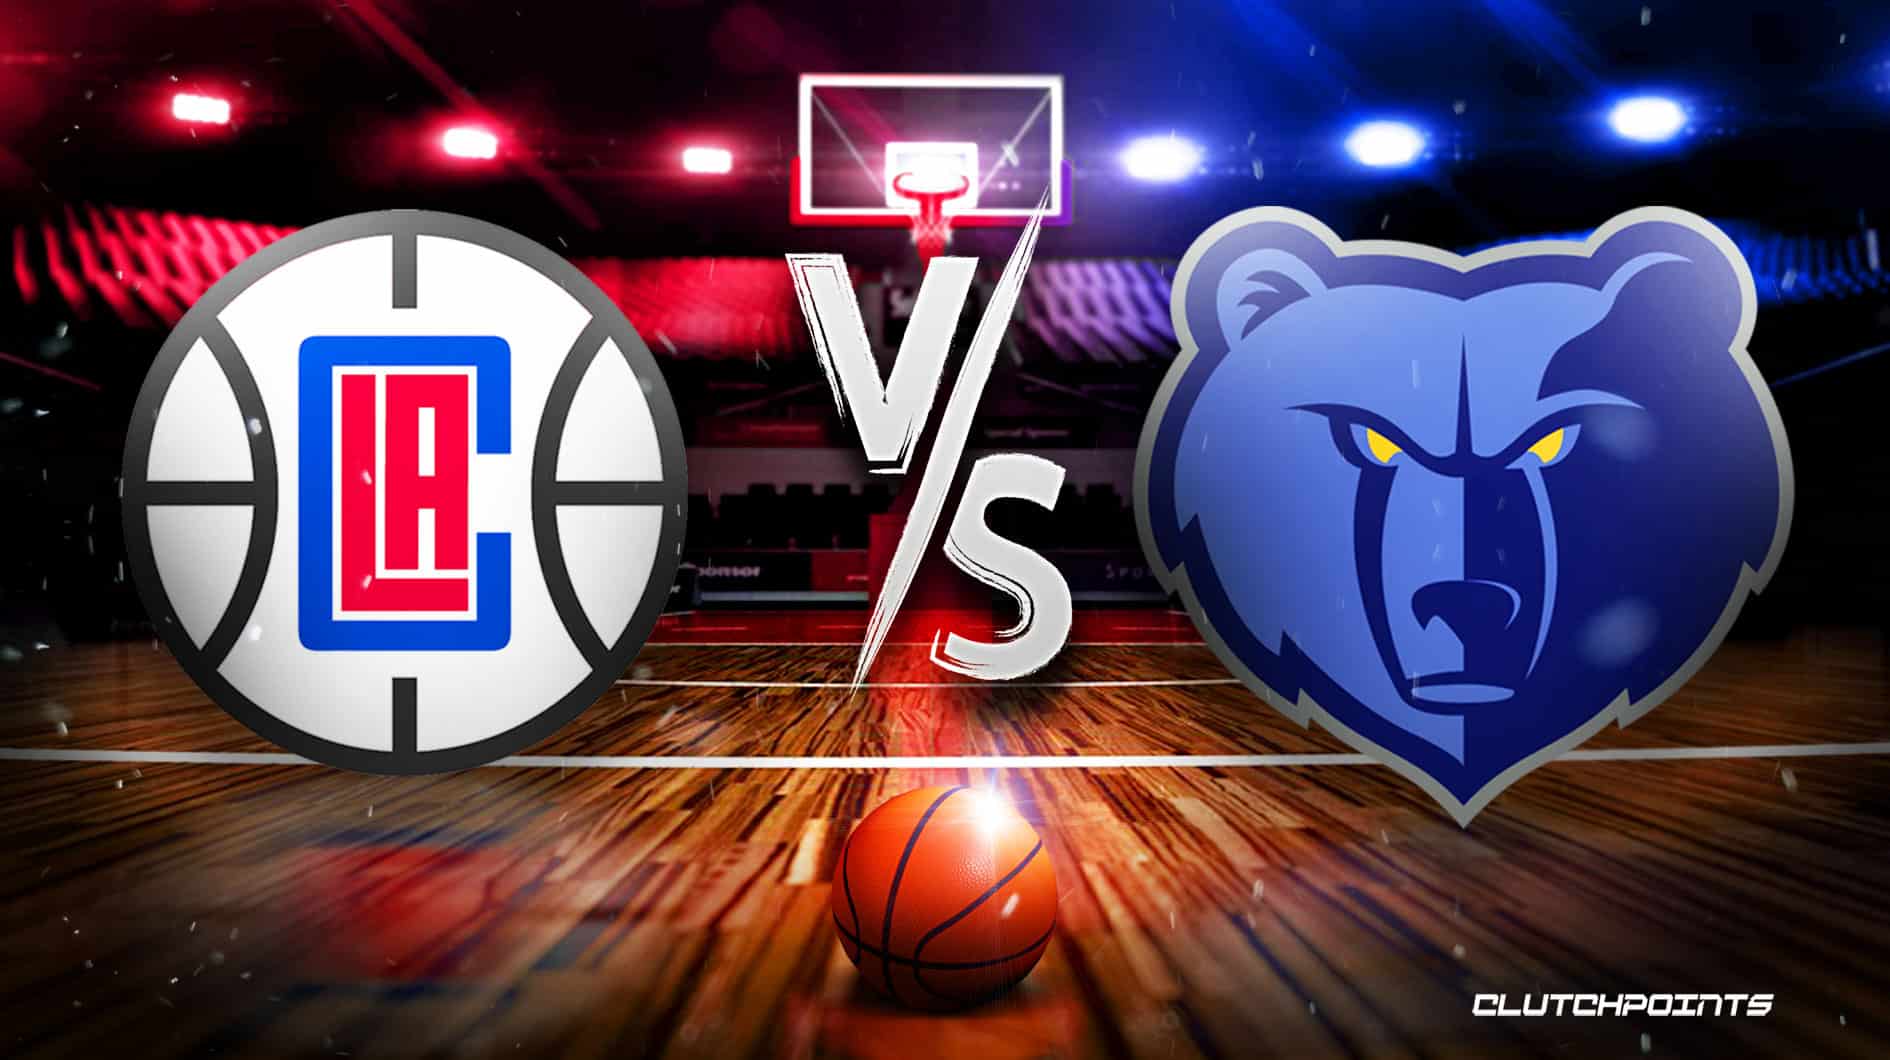 LA Clippers at Memphis Grizzlies odds, picks and predictions